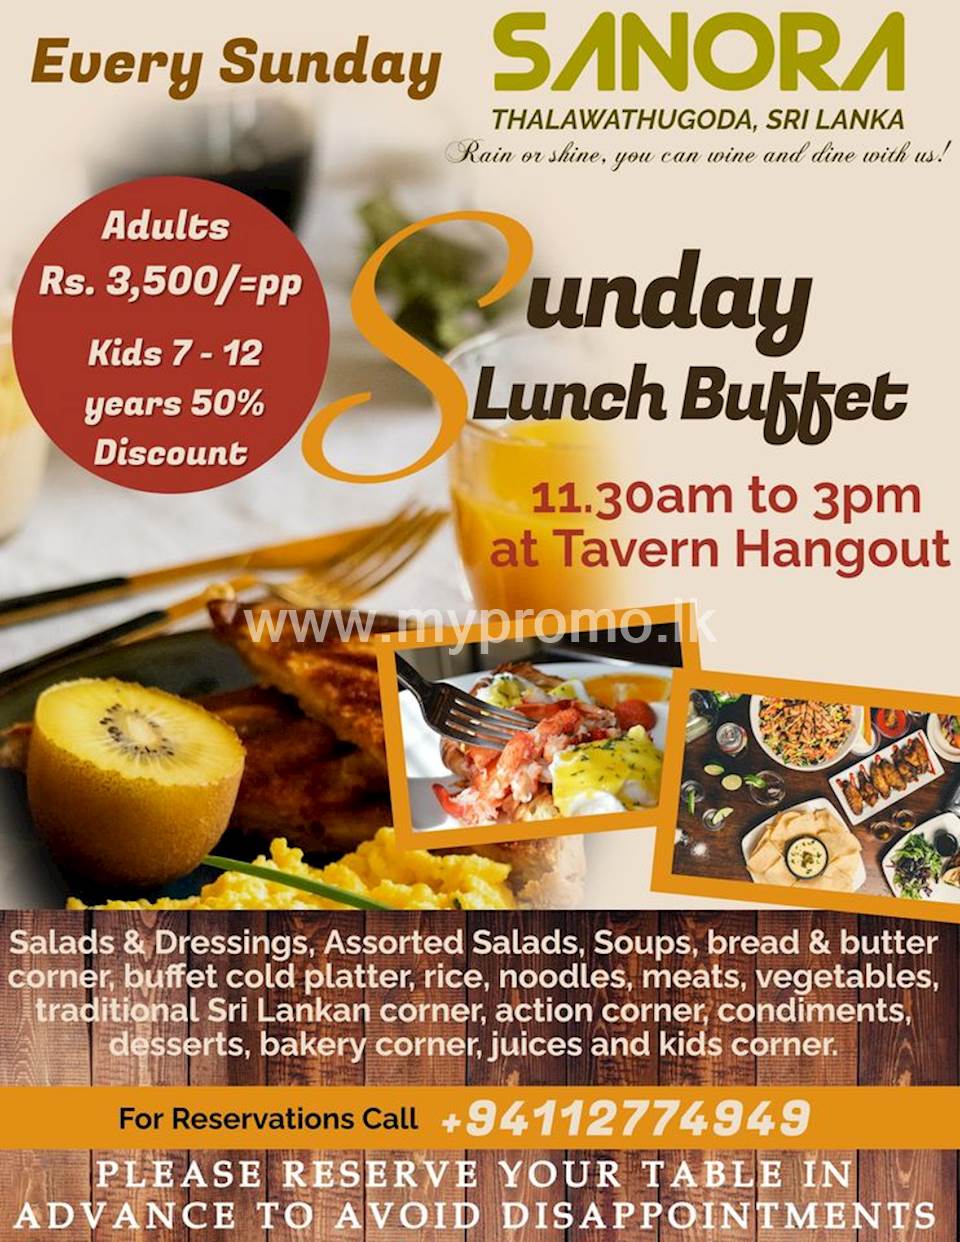 Sunday Lunch Buffet at Sanora